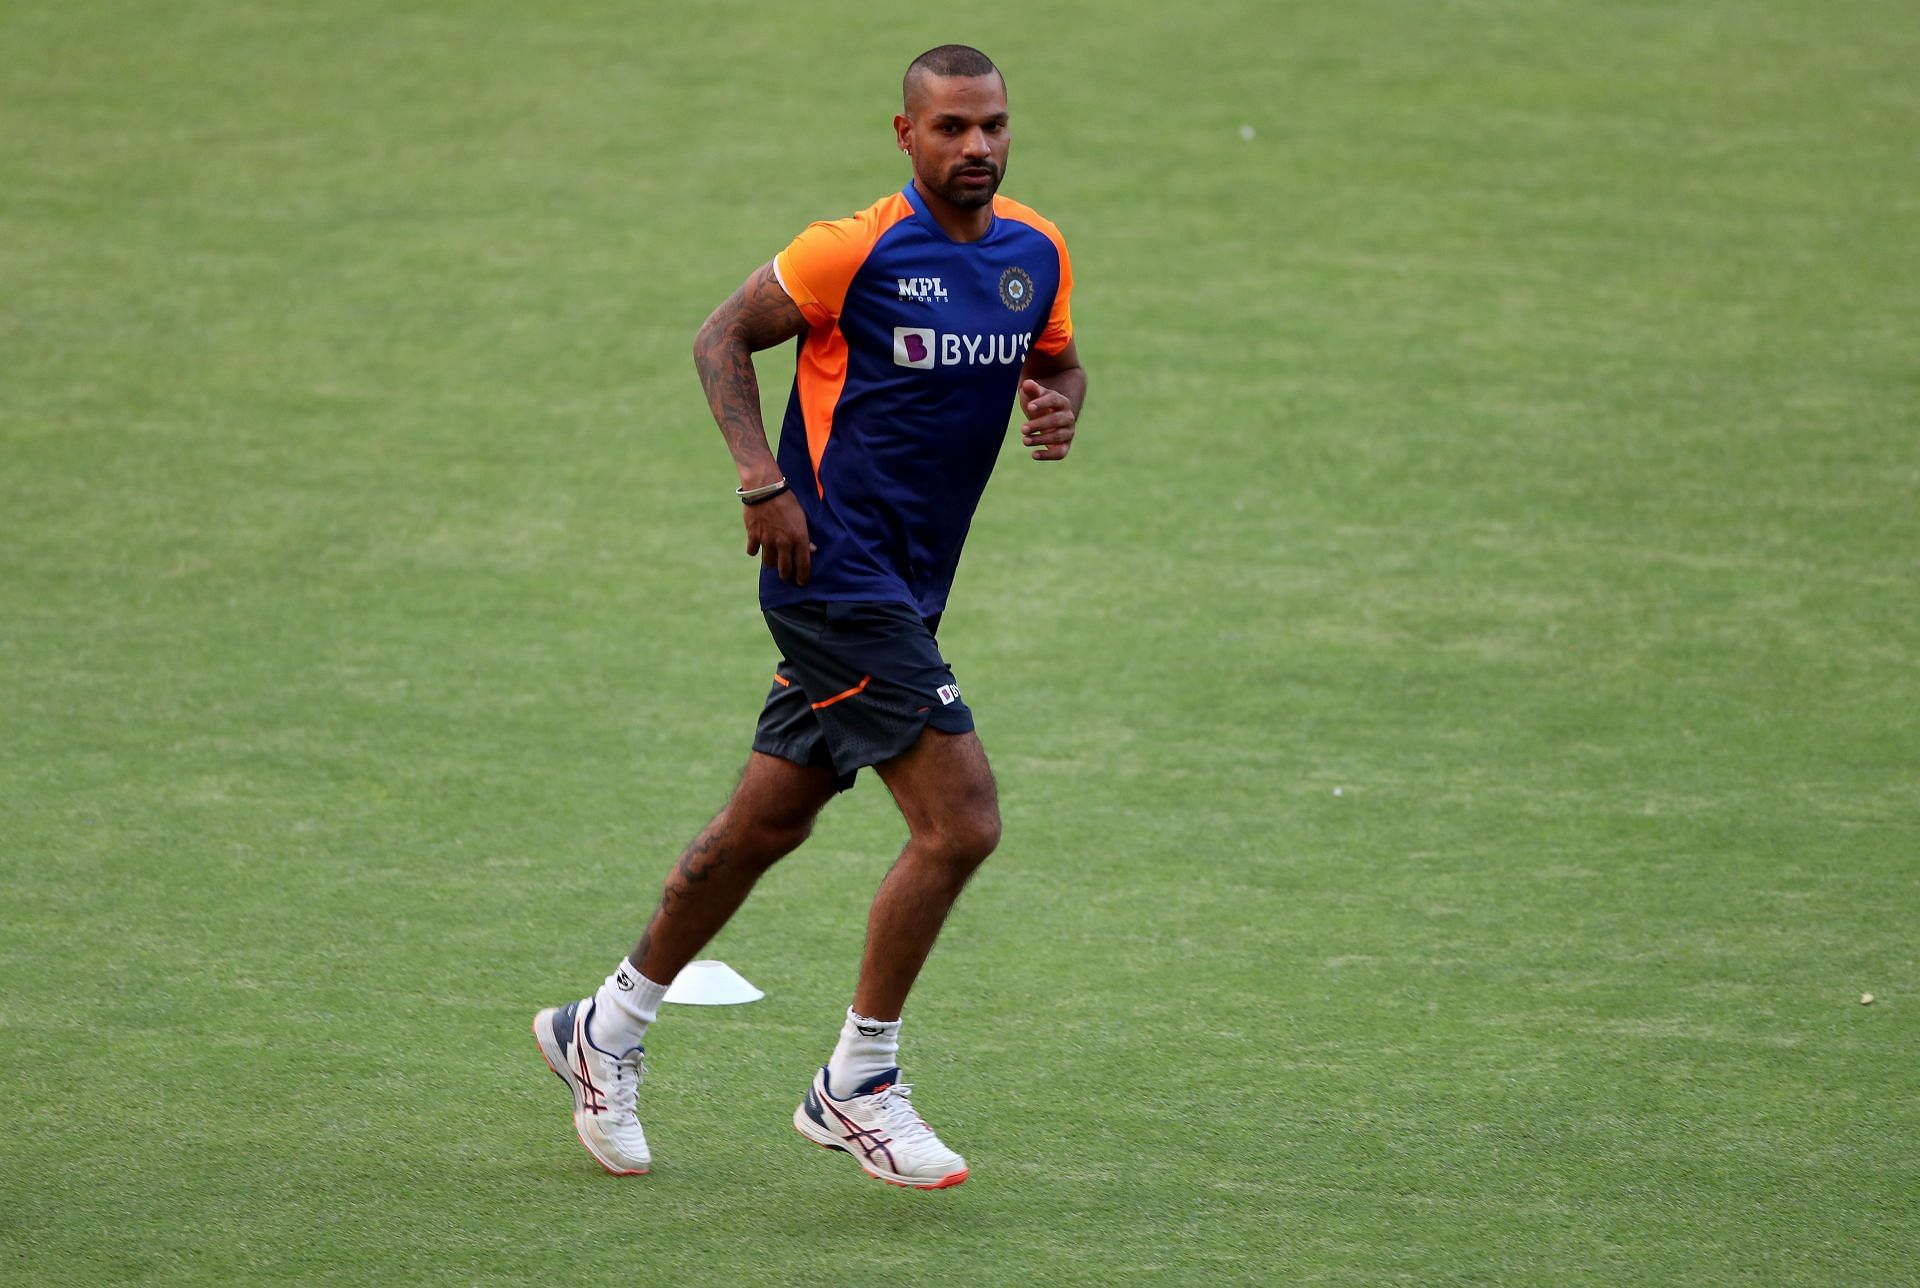 Shikhar Dhawan captained Team India in the limited-overs series against Sri Lanka